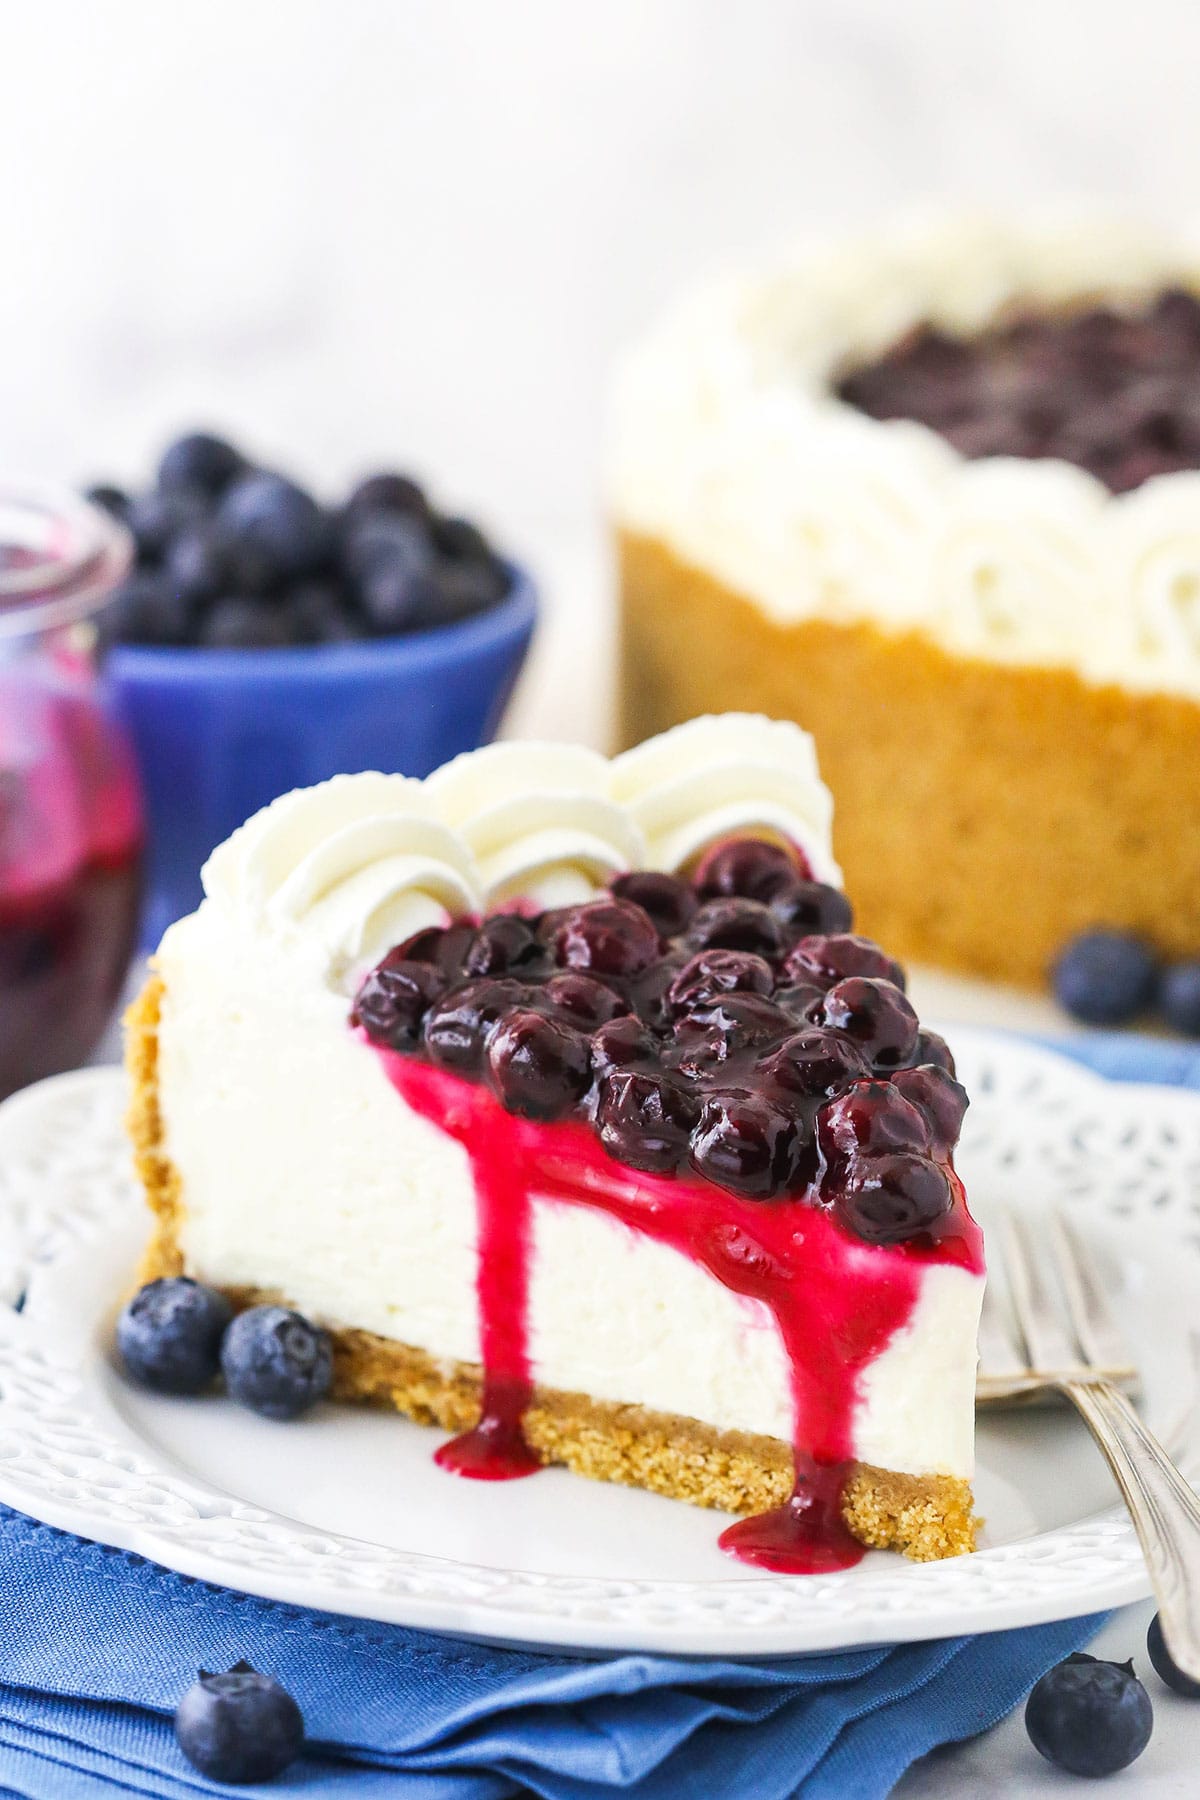 A piece of blueberry cheesecake on a plate with a bowl of blueberries and the remaining cake behind it